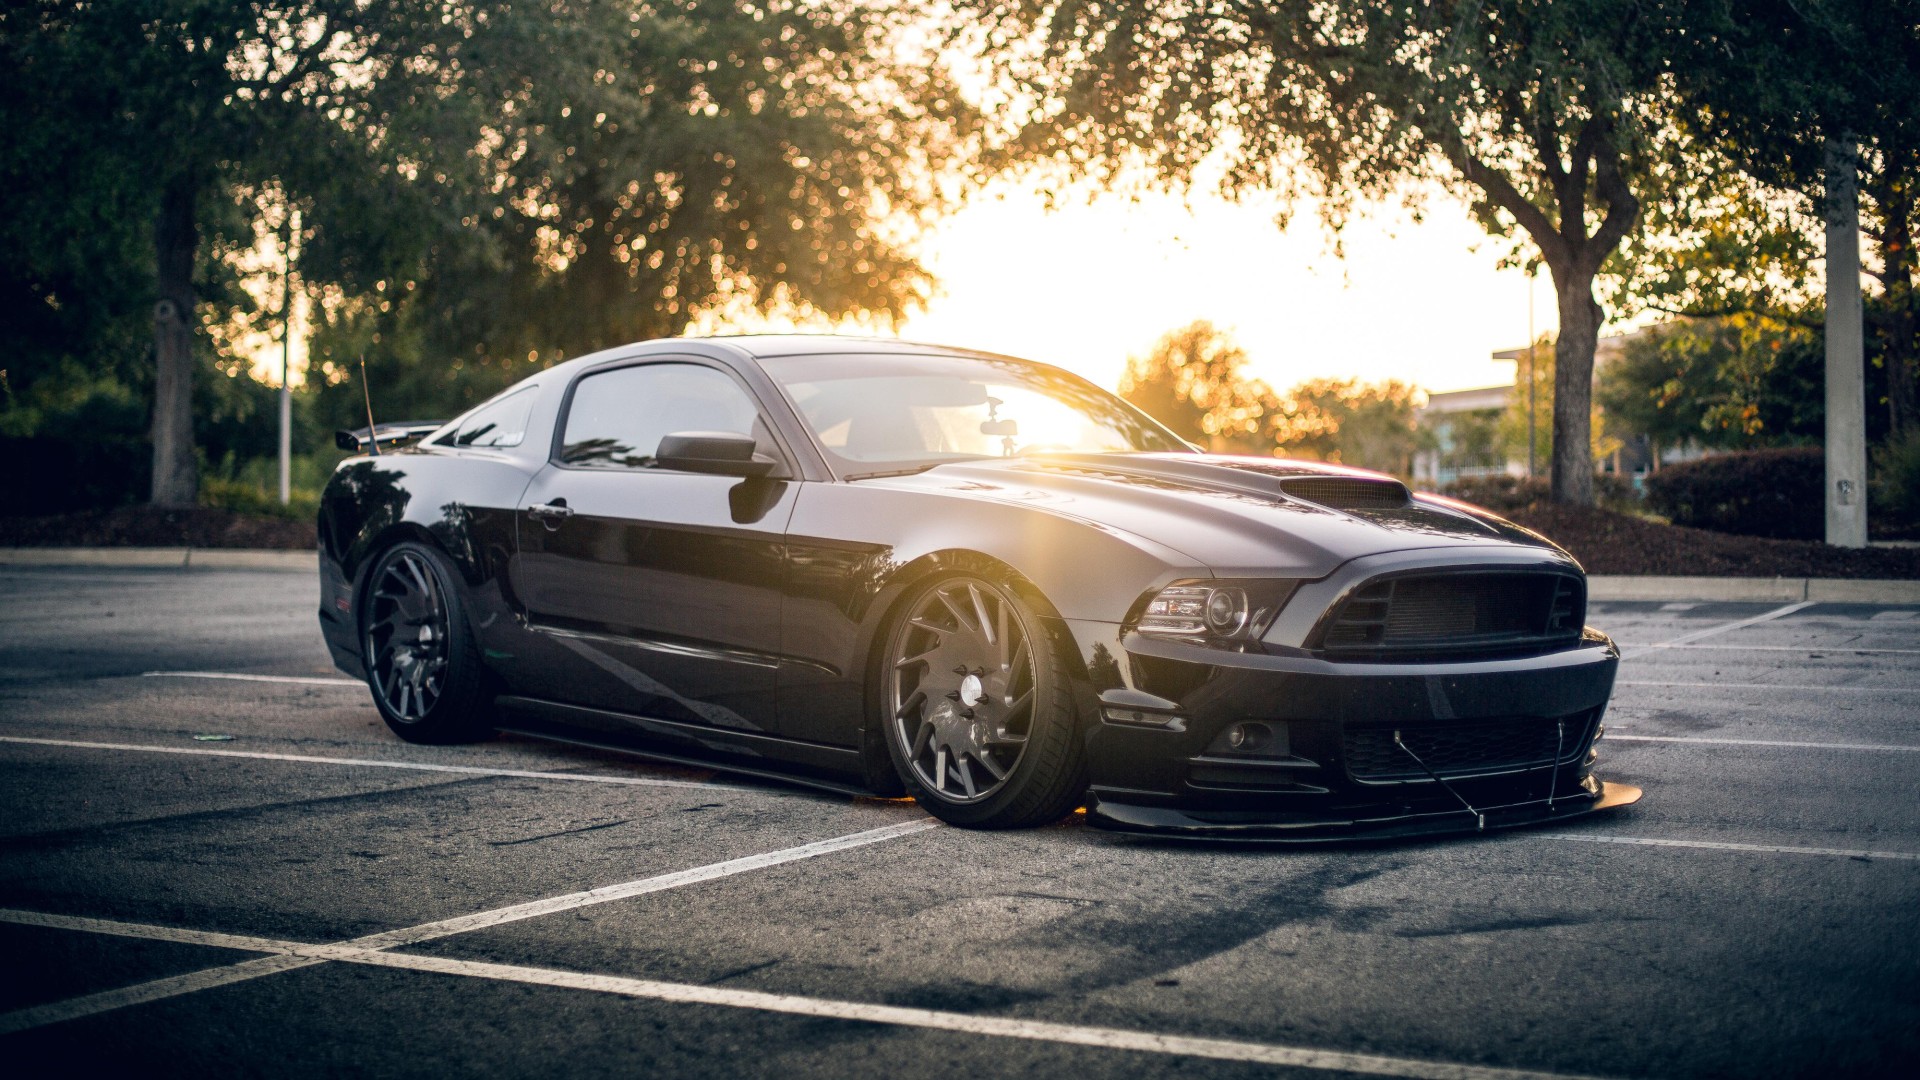 Ford Mustang Shelby Black 4K Wallpaper | HD Car Wallpapers | ID #7795